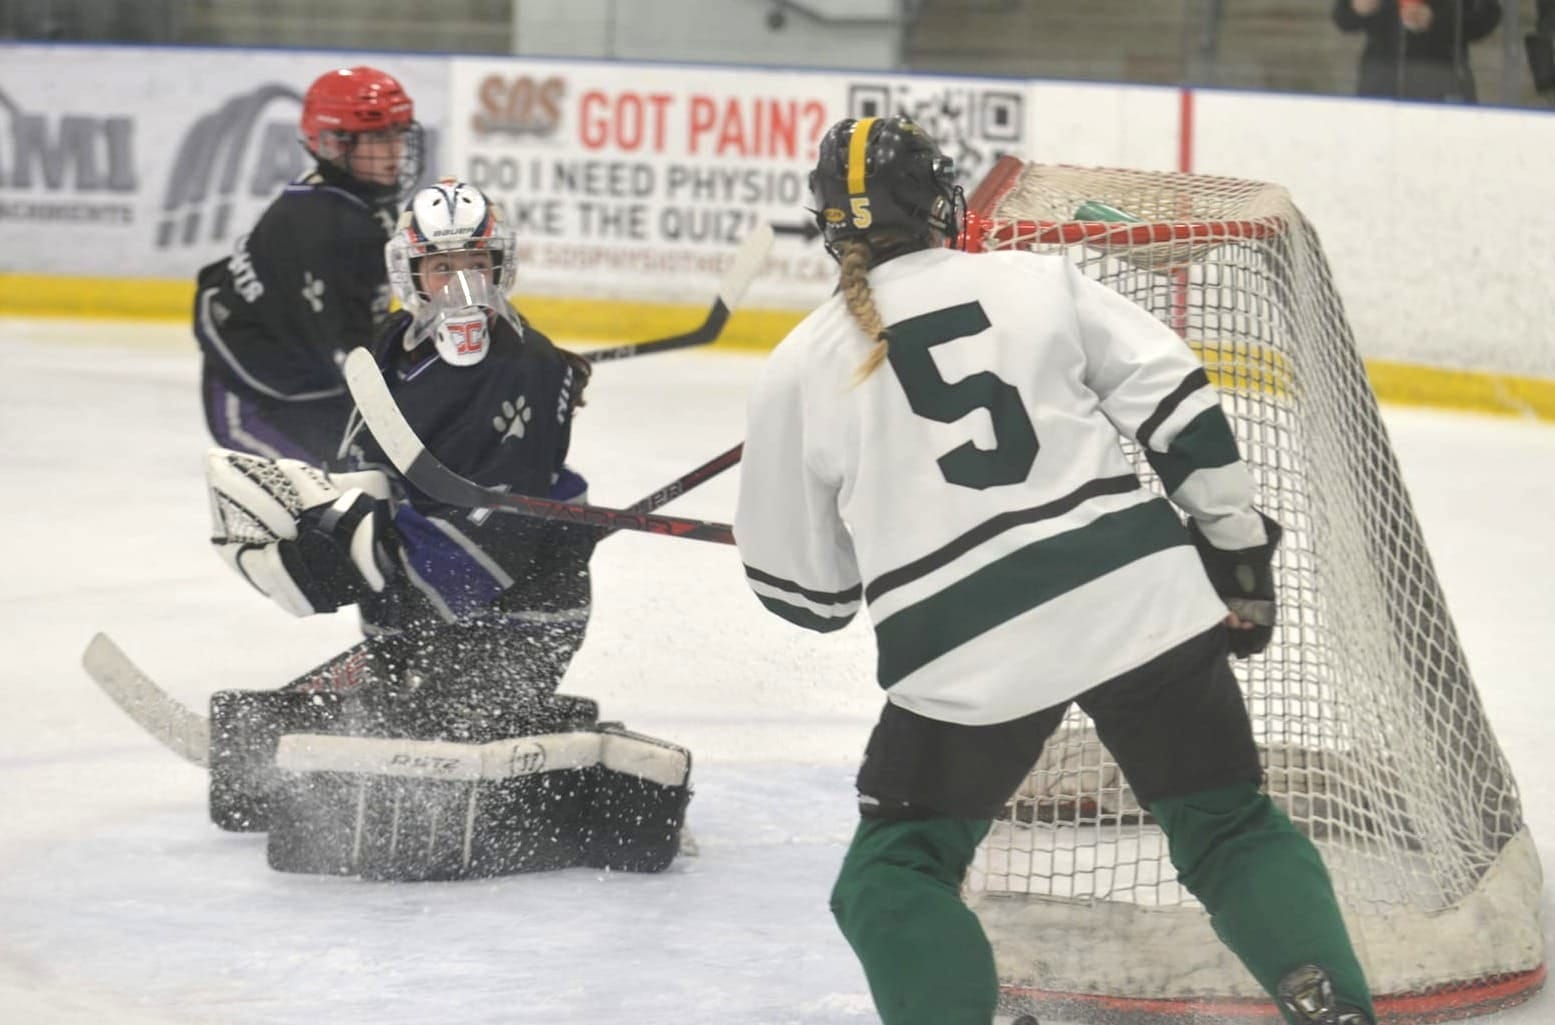 EDSS hockey teams had another strong year leading up to regionals